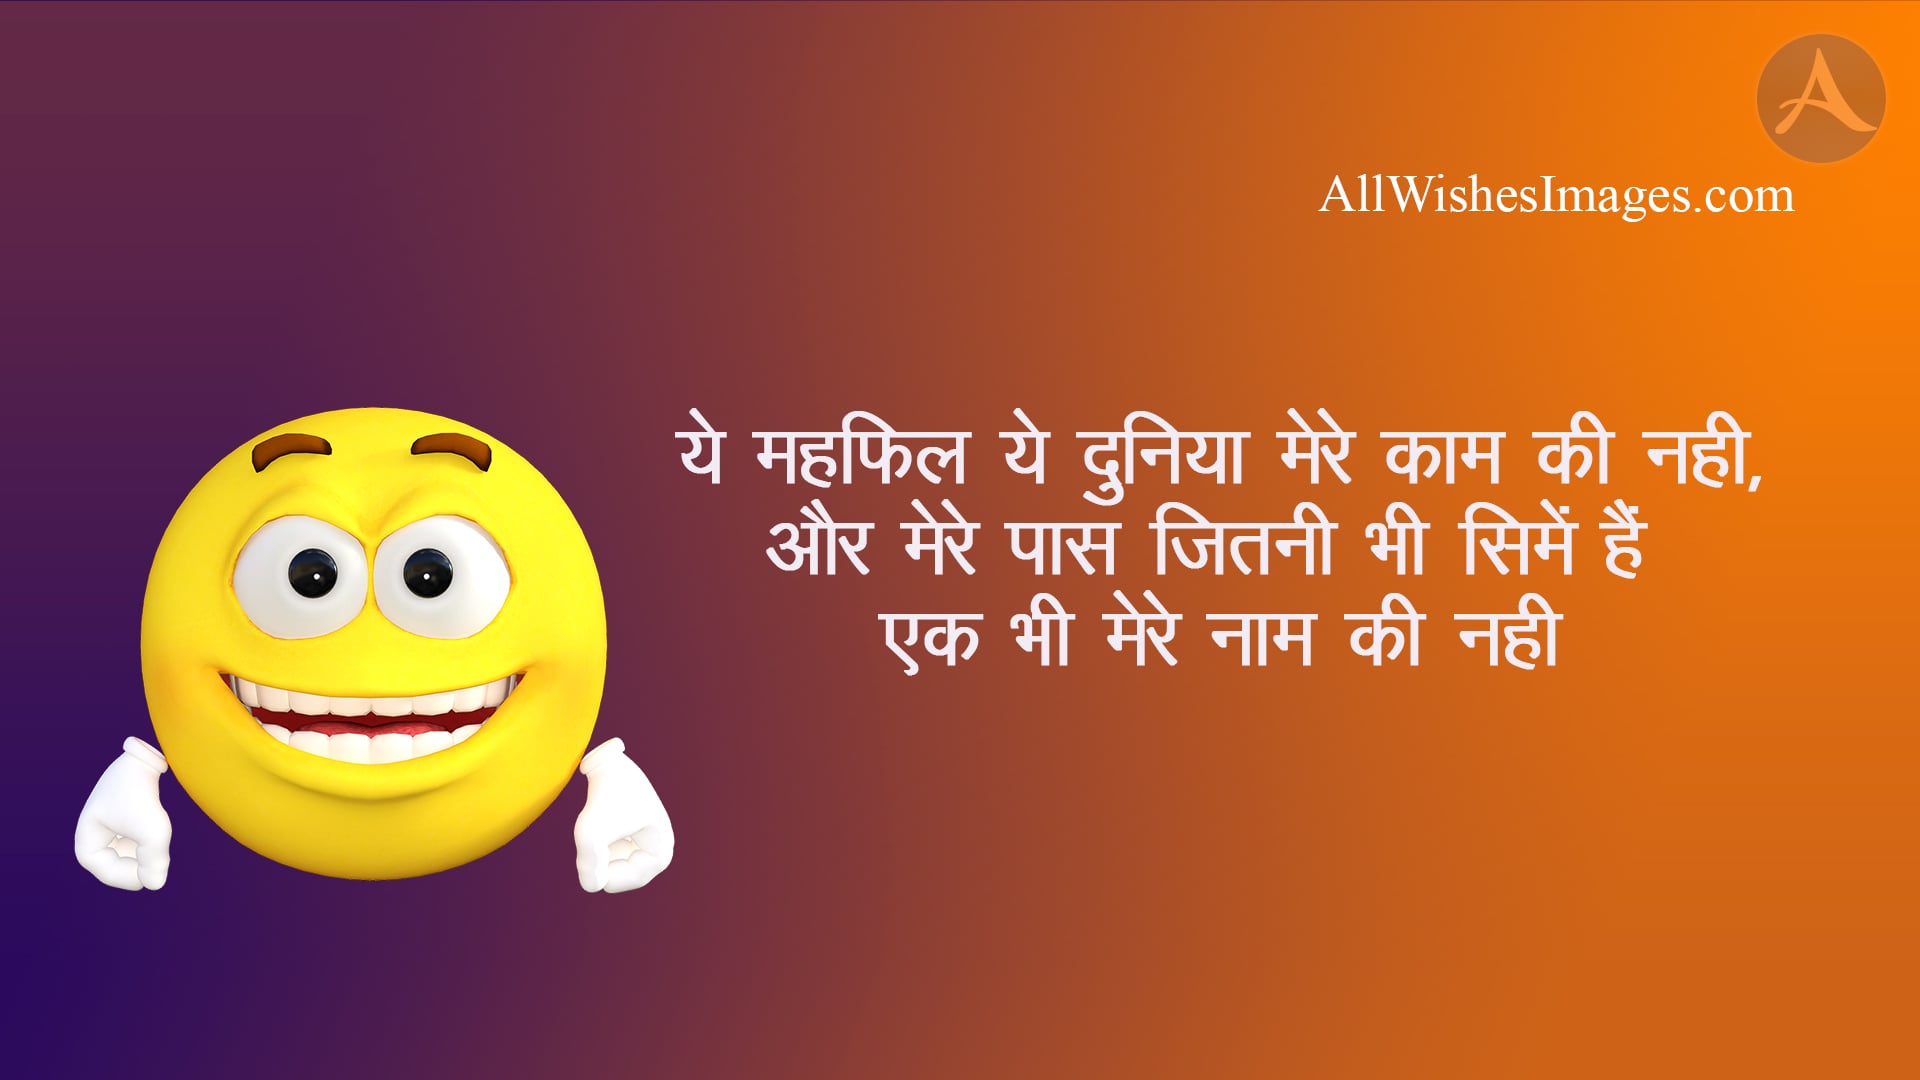 Funny Shayari - All Wishes Images - Images for WhatsApp